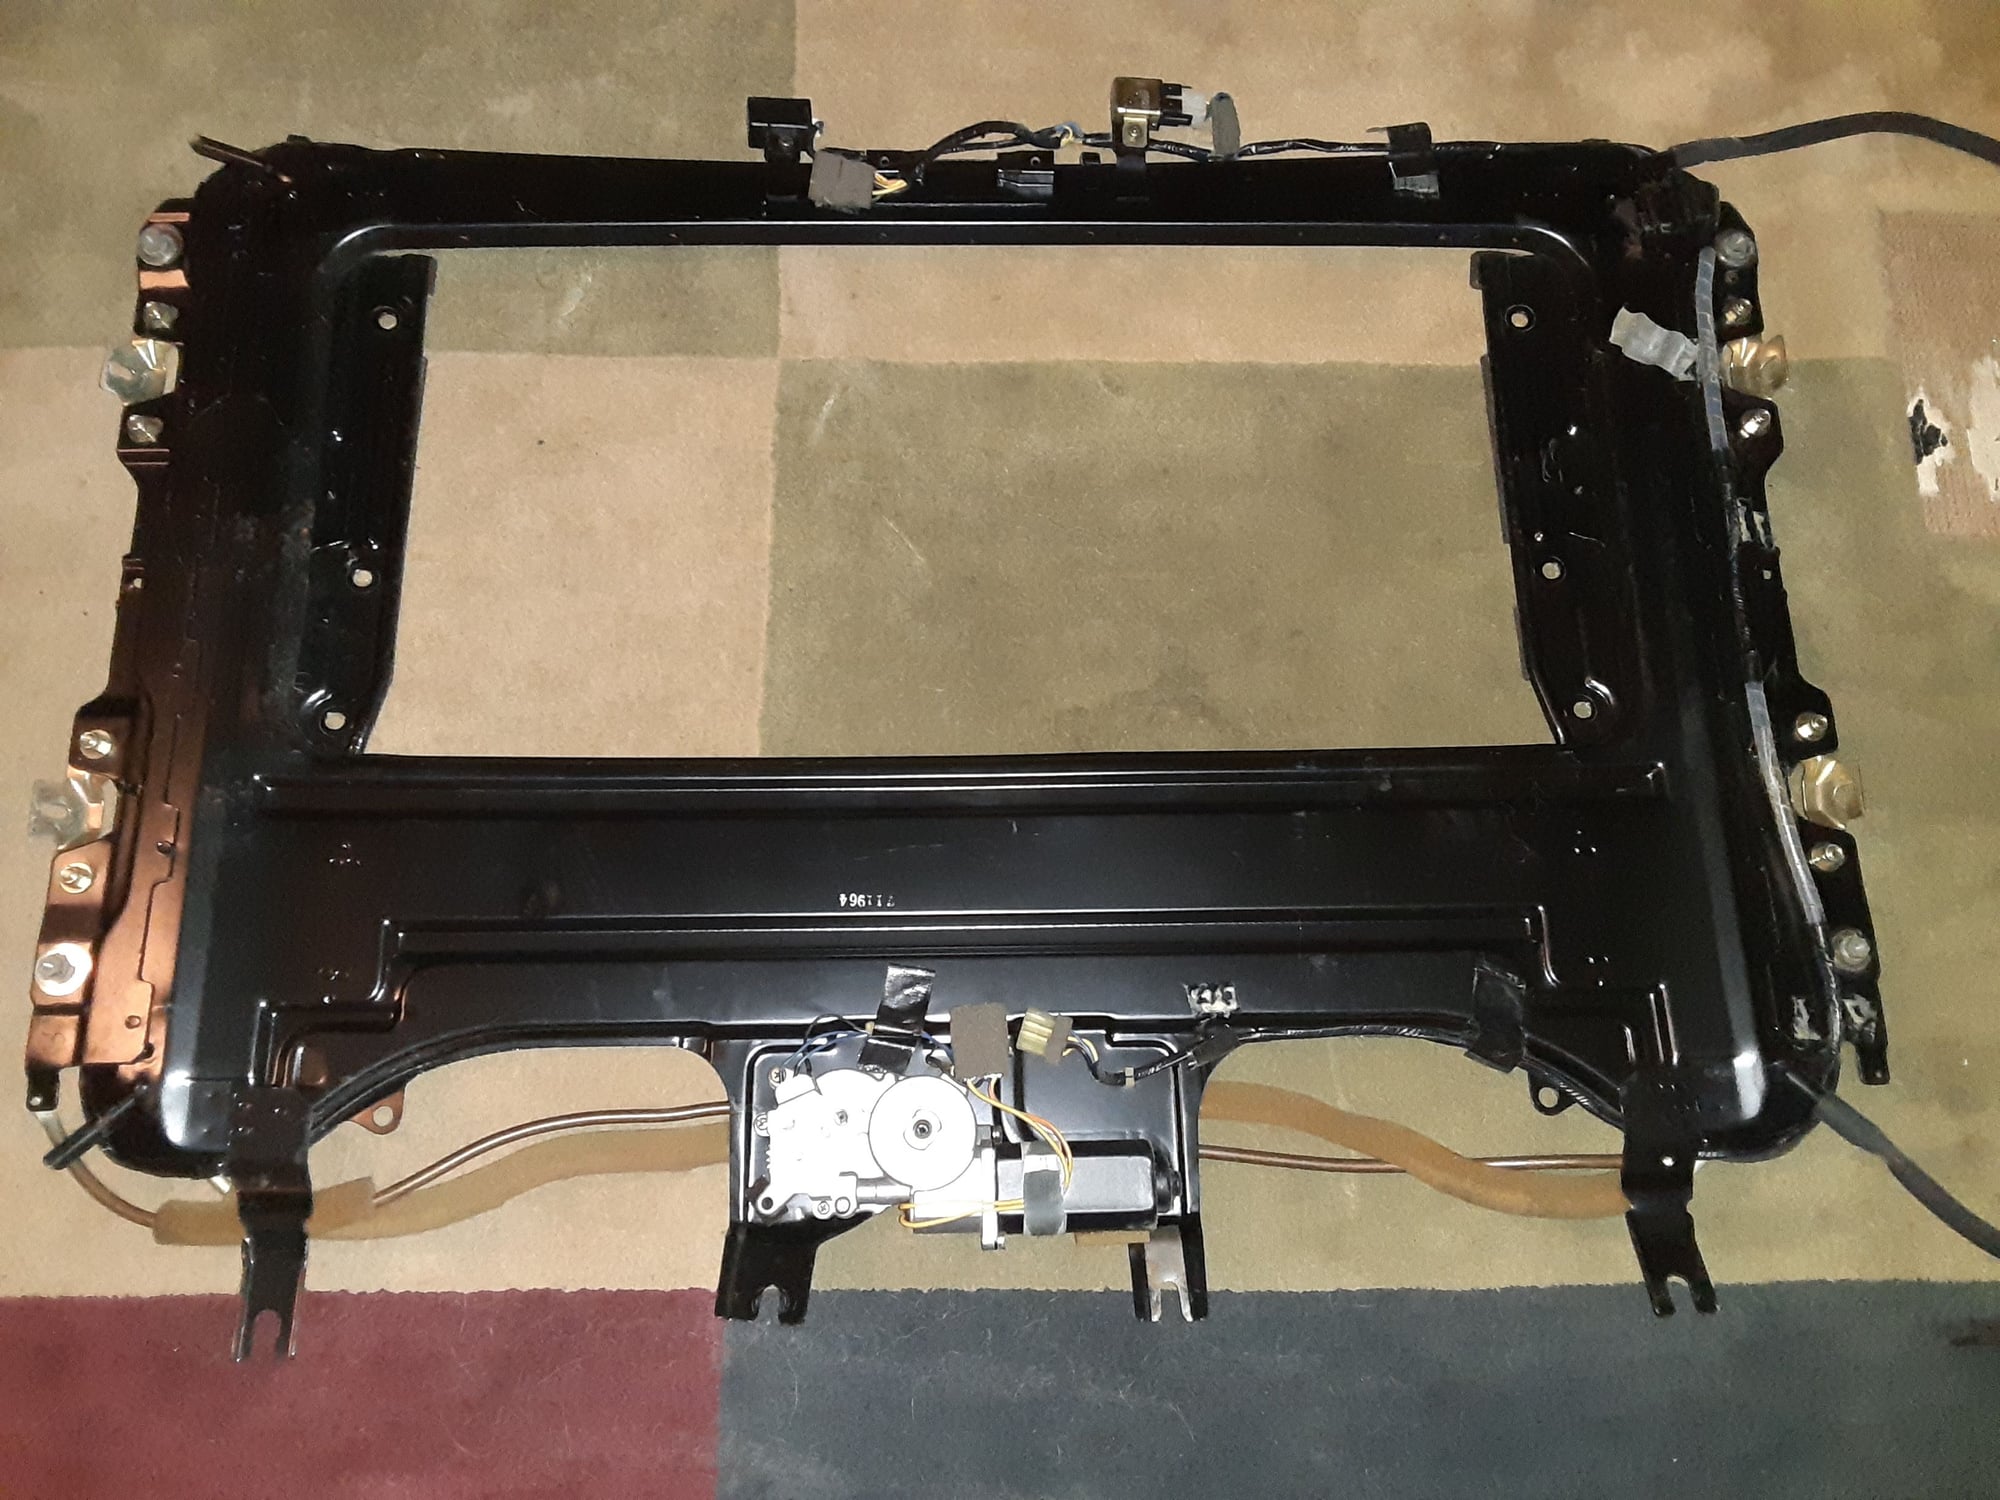 Exterior Body Parts - Complete S5 Sunroof For Sale! - Used - 0  All Models - Spotswood, NJ 08884, United States